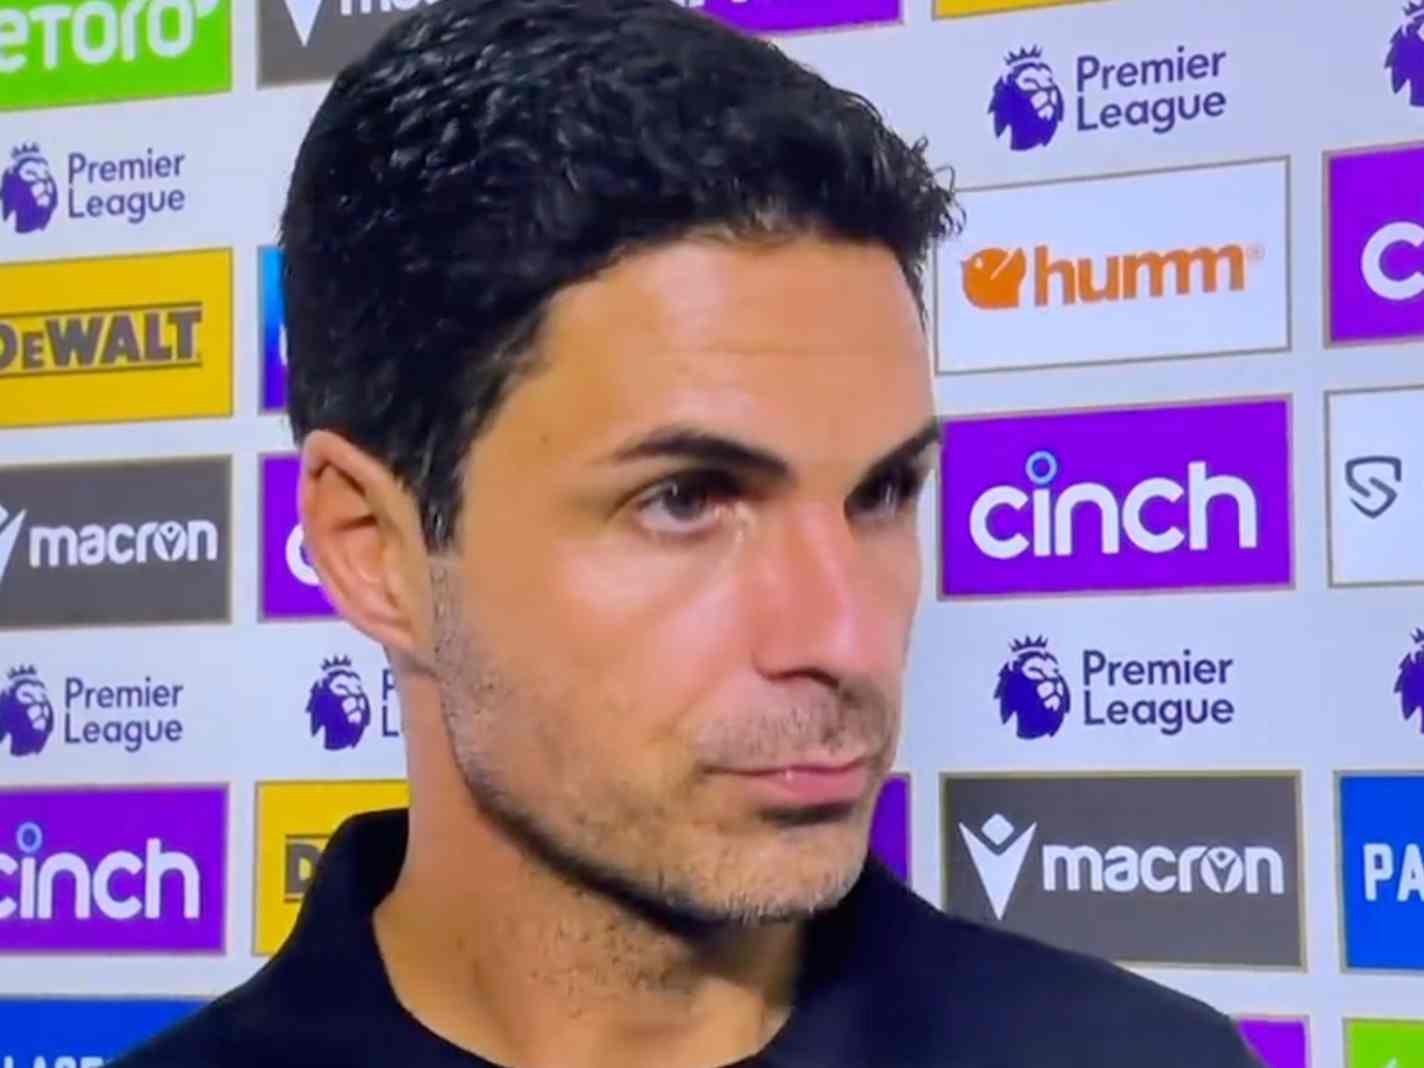 Mikel Arteta Parodies Pep Guardiola in Viral Interview After Crystal Palace Win